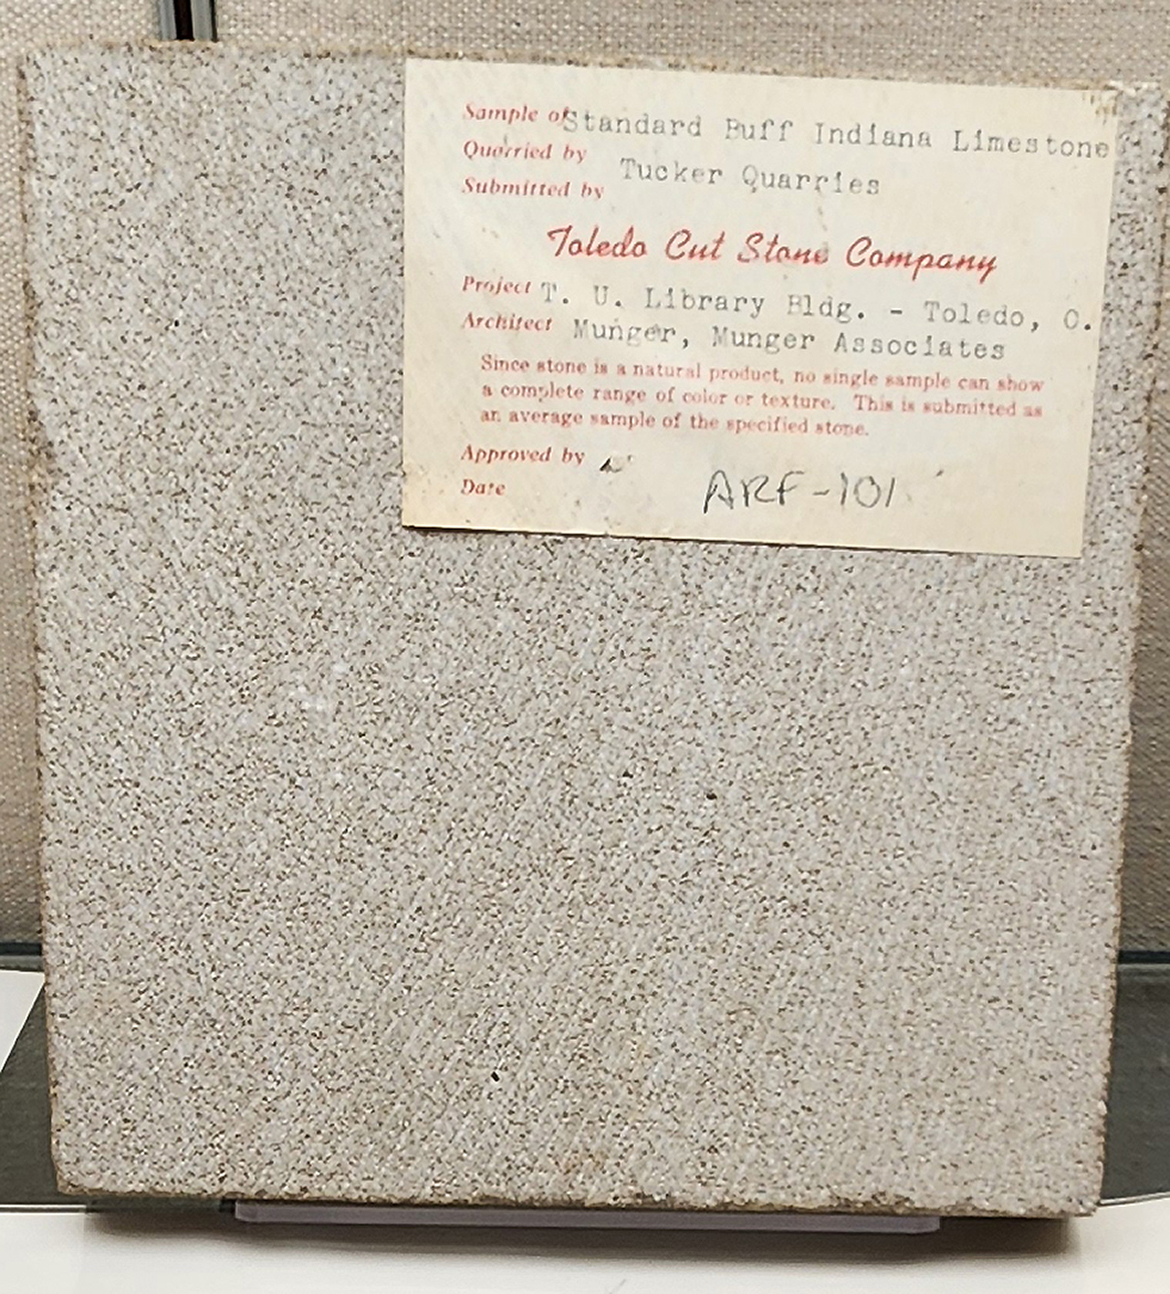 A sample of standard buff Indiana limestone used in the construction of the new library building